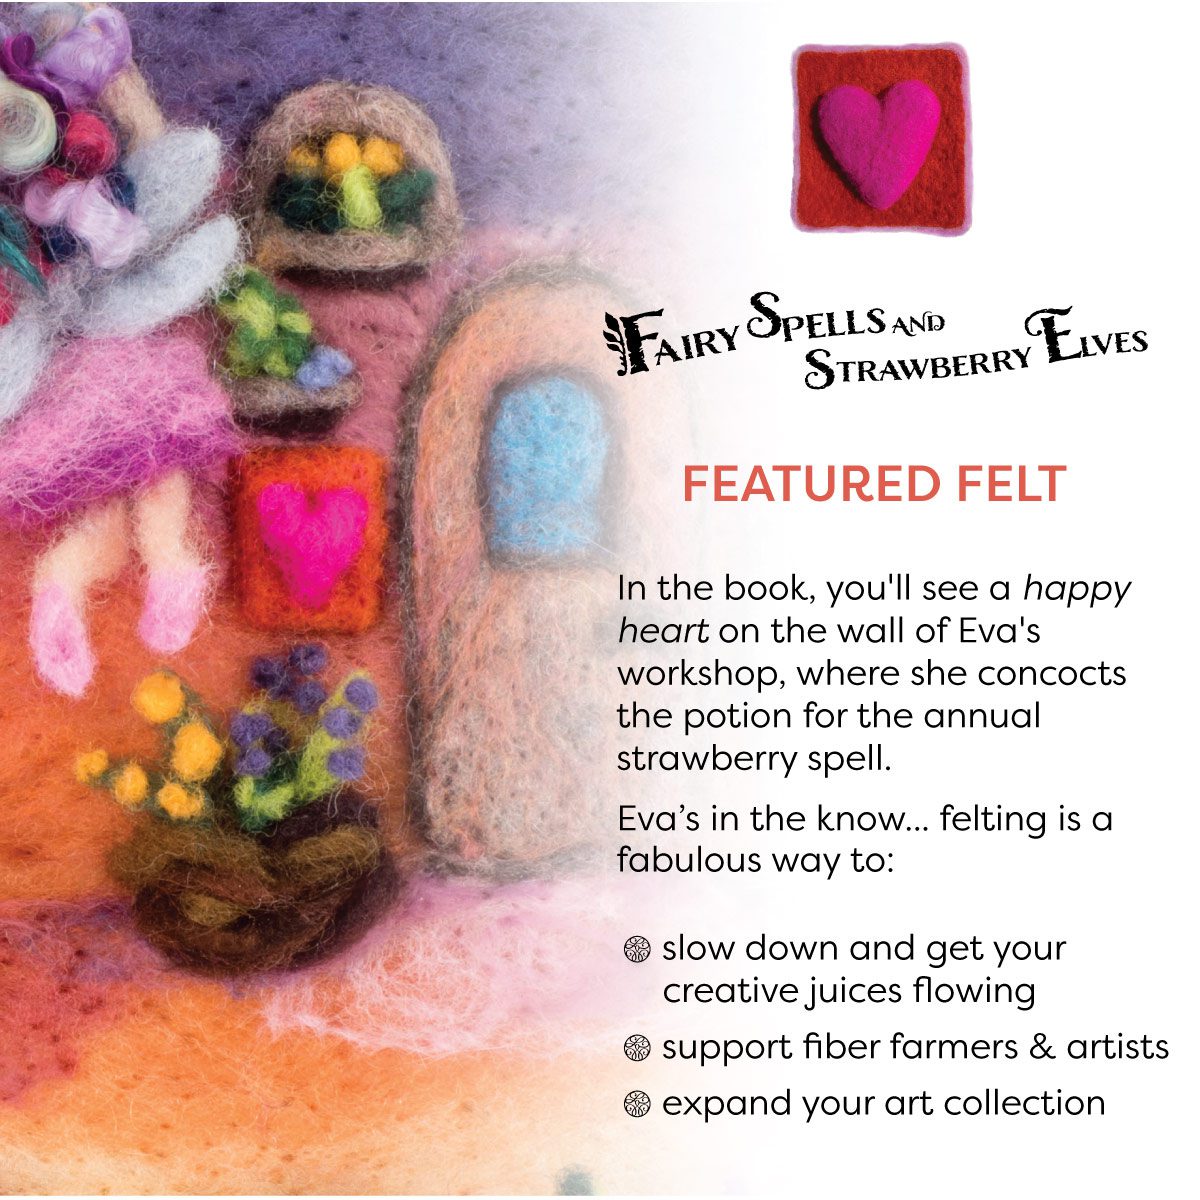 Happy-Heart-needle felting kit as seen in the book.